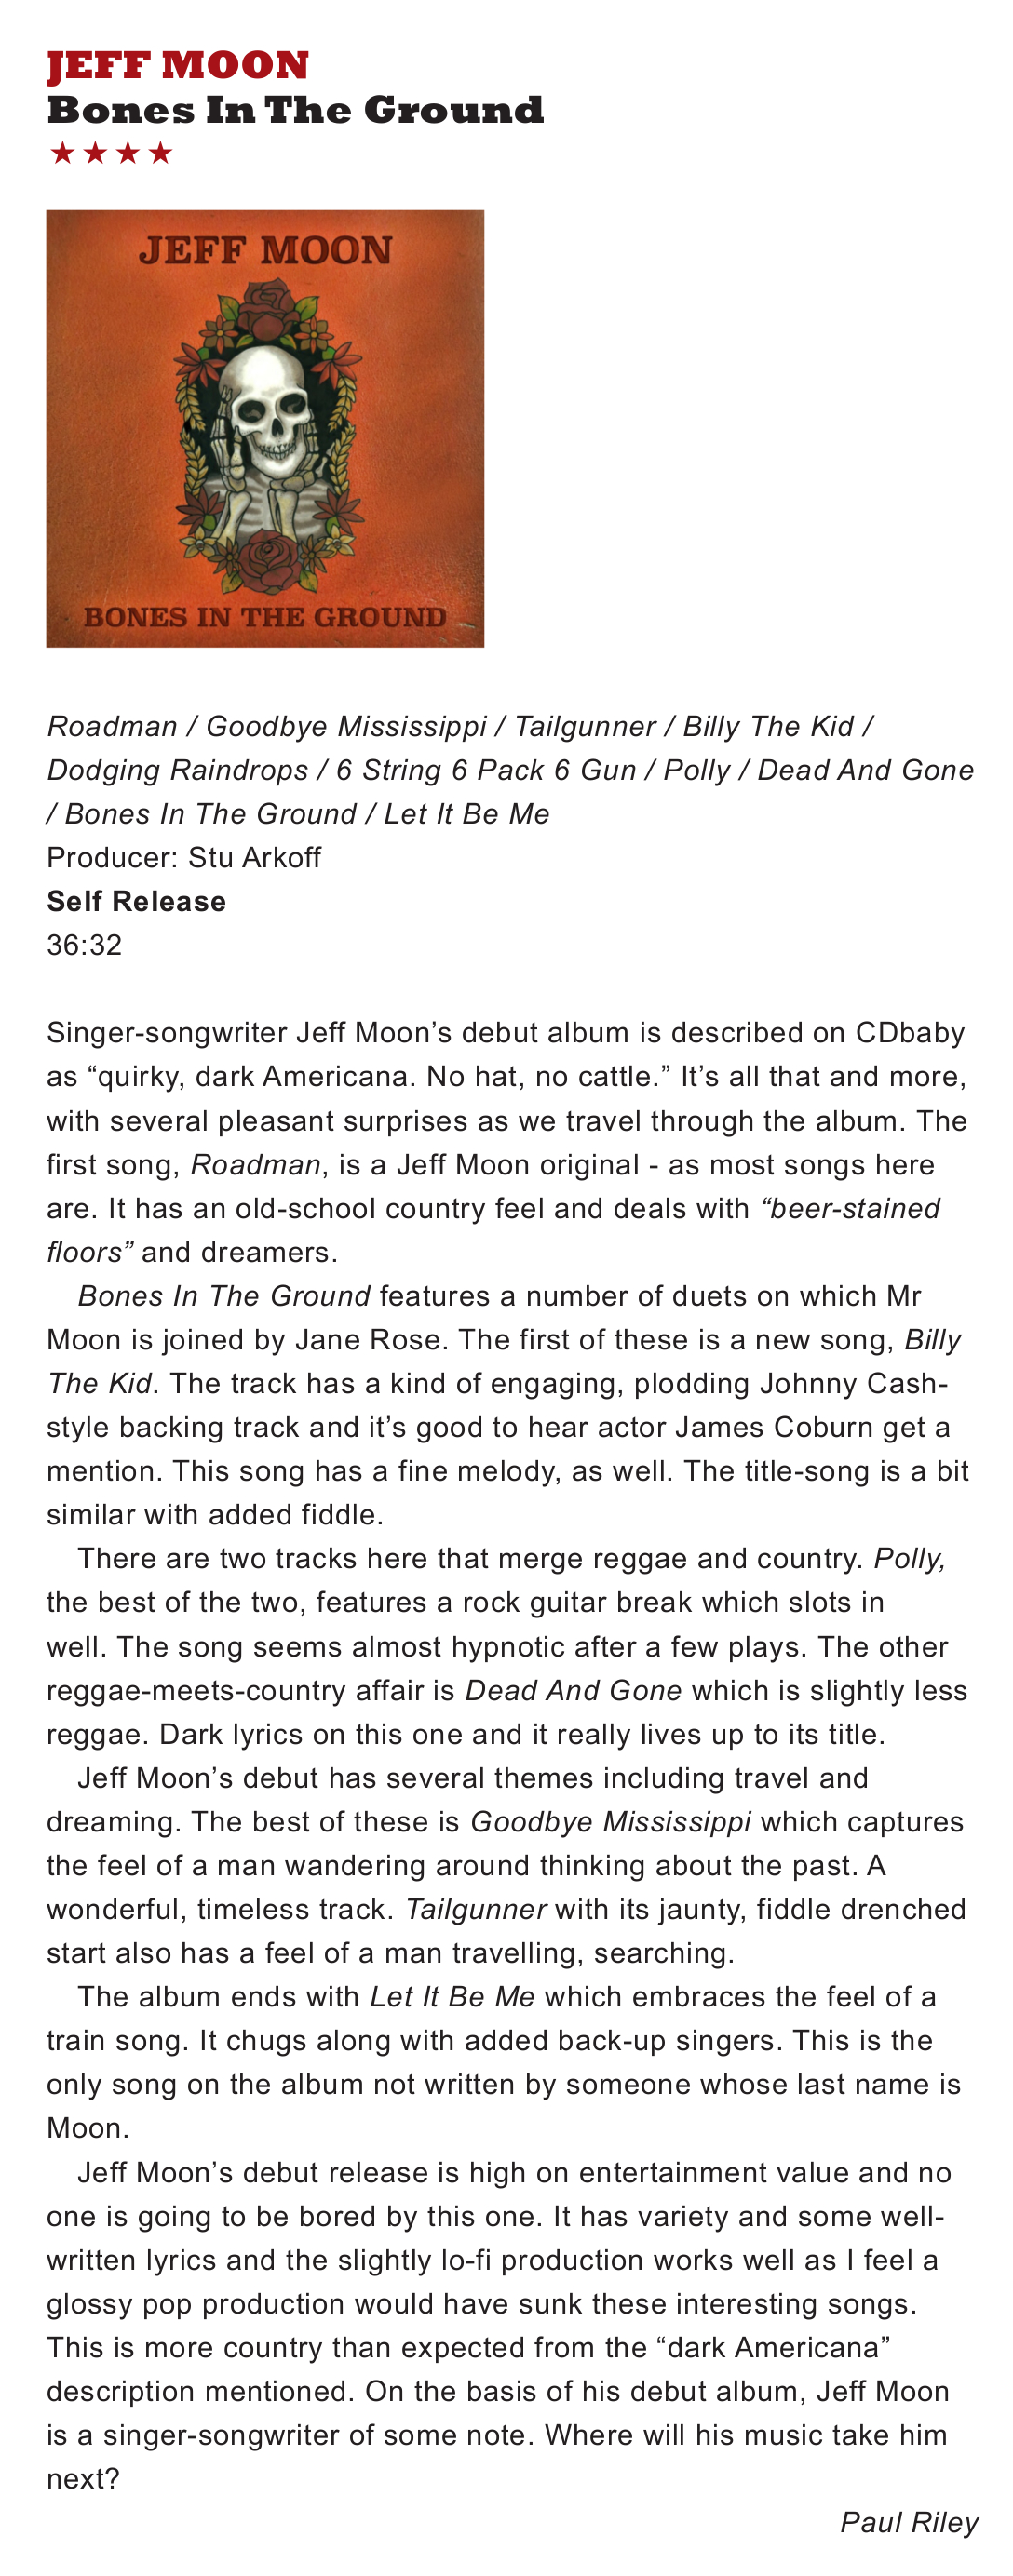 
    JEFF MOON
    Bones In The Ground
    Roadman / Goodbye Mississippi / Tailgunner / Billy The Kid /
Dodging Raindrops / 6 String 6 Pack 6 Gun / Polly / Dead And Gone
/ Bones In The Ground / Let It Be Me
Producer: Stu Arkoff
Self Release
36:32
Singer-songwriter Jeff Moon’s debut album is described on CDbaby
as “quirky, dark Americana. No hat, no cattle.” It’s all that and more,
with several pleasant surprises as we travel through the album. The
first song, Roadman, is a Jeff Moon original - as most songs here
are. It has an old-school country feel and deals with “beer-stained
floors” and dreamers.
Bones In The Ground features a number of duets on which Mr
Moon is joined by Jane Rose. The first of these is a new song, Billy
The Kid. The track has a kind of engaging, plodding Johnny Cash-
style backing track and it’s good to hear actor James Coburn get a
mention. This song has a fine melody, as well. The title-song is a bit
similar with added fiddle.
There are two tracks here that merge reggae and country. Polly,
the best of the two, features a rock guitar break which slots in
well. The song seems almost hypnotic after a few plays. The other
reggae-meets-country affair is Dead And Gone which is slightly less
reggae. Dark lyrics on this one and it really lives up to its title.
Jeff Moon’s debut has several themes including travel and
dreaming. The best of these is Goodbye Mississippi which captures
the feel of a man wandering around thinking about the past. A
wonderful, timeless track. Tailgunner with its jaunty, fiddle drenched
start also has a feel of a man travelling, searching.
The album ends with Let It Be Me which embraces the feel of a
train song. It chugs along with added back-up singers. This is the
only song on the album not written by someone whose last name is
Moon.
Jeff Moon’s debut release is high on entertainment value and no
one is going to be bored by this one. It has variety and some well-
written lyrics and the slightly lo-fi production works well as I feel a
glossy pop production would have sunk these interesting songs.
This is more country than expected from the “dark Americana”
description mentioned. On the basis of his debut album, Jeff Moon
is a singer-songwriter of some note. Where will his music take him
next?
- Paul Riley
    